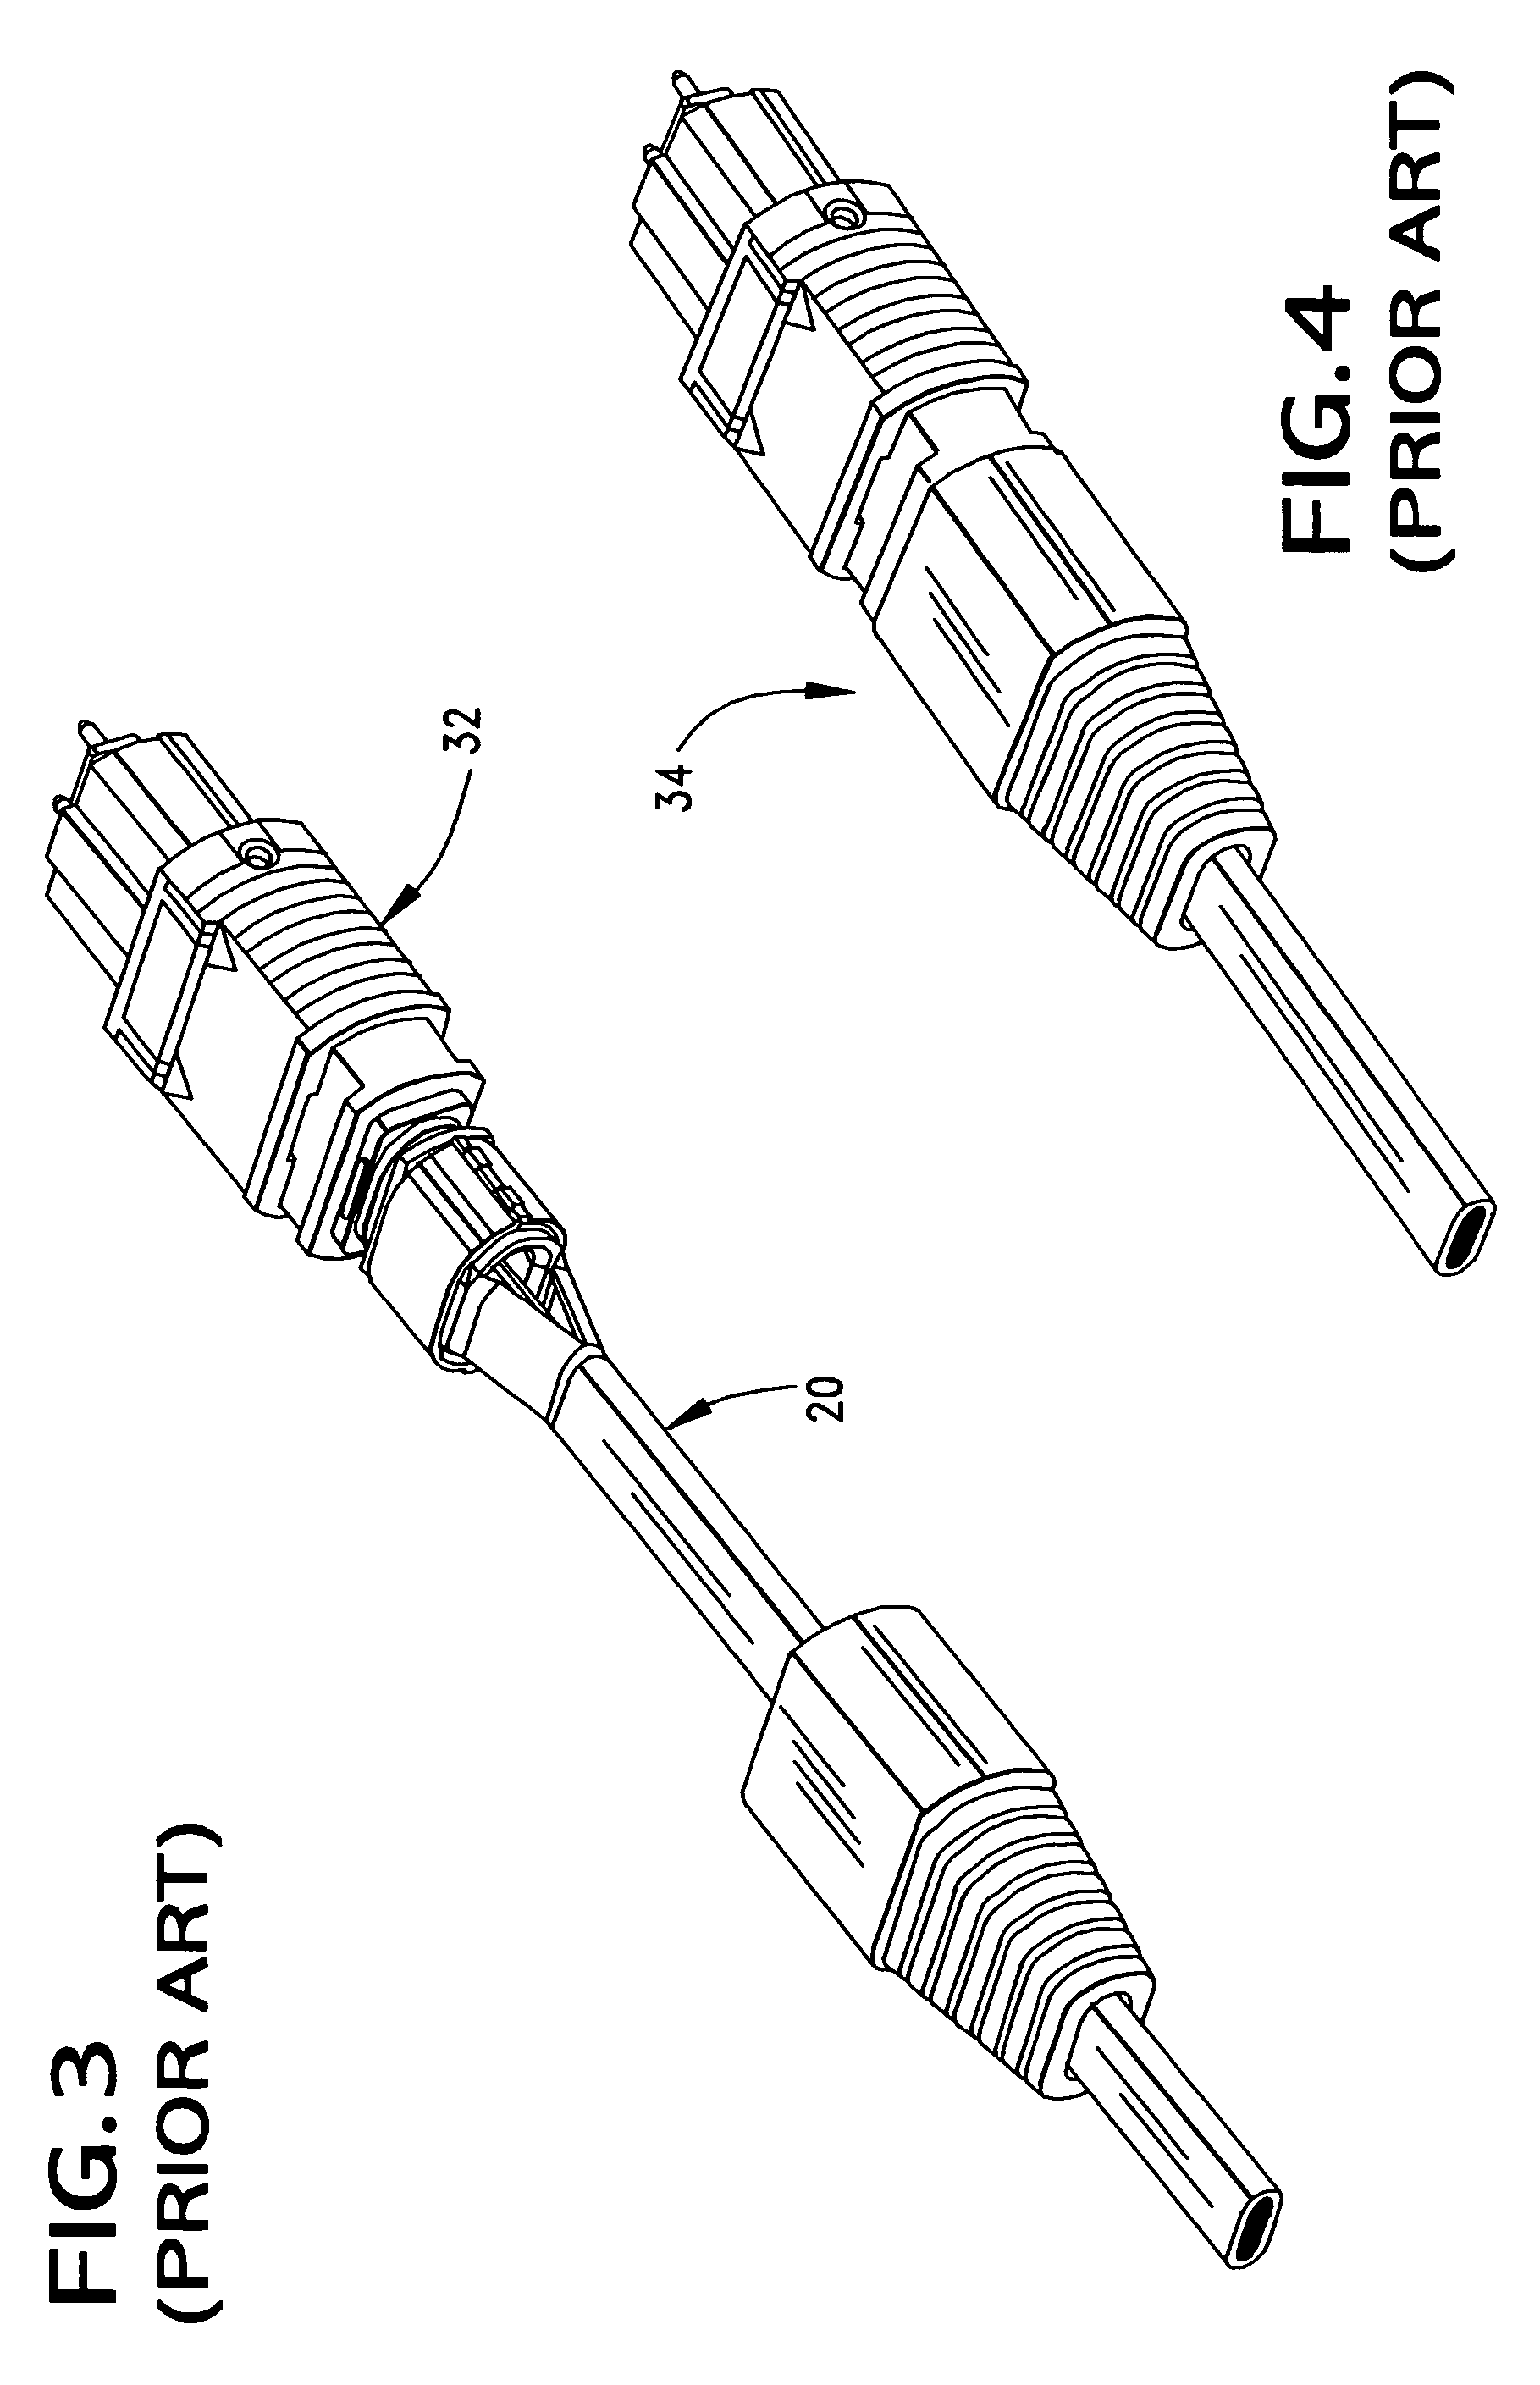 Round multi-fiber cable assembly and a method of forming same